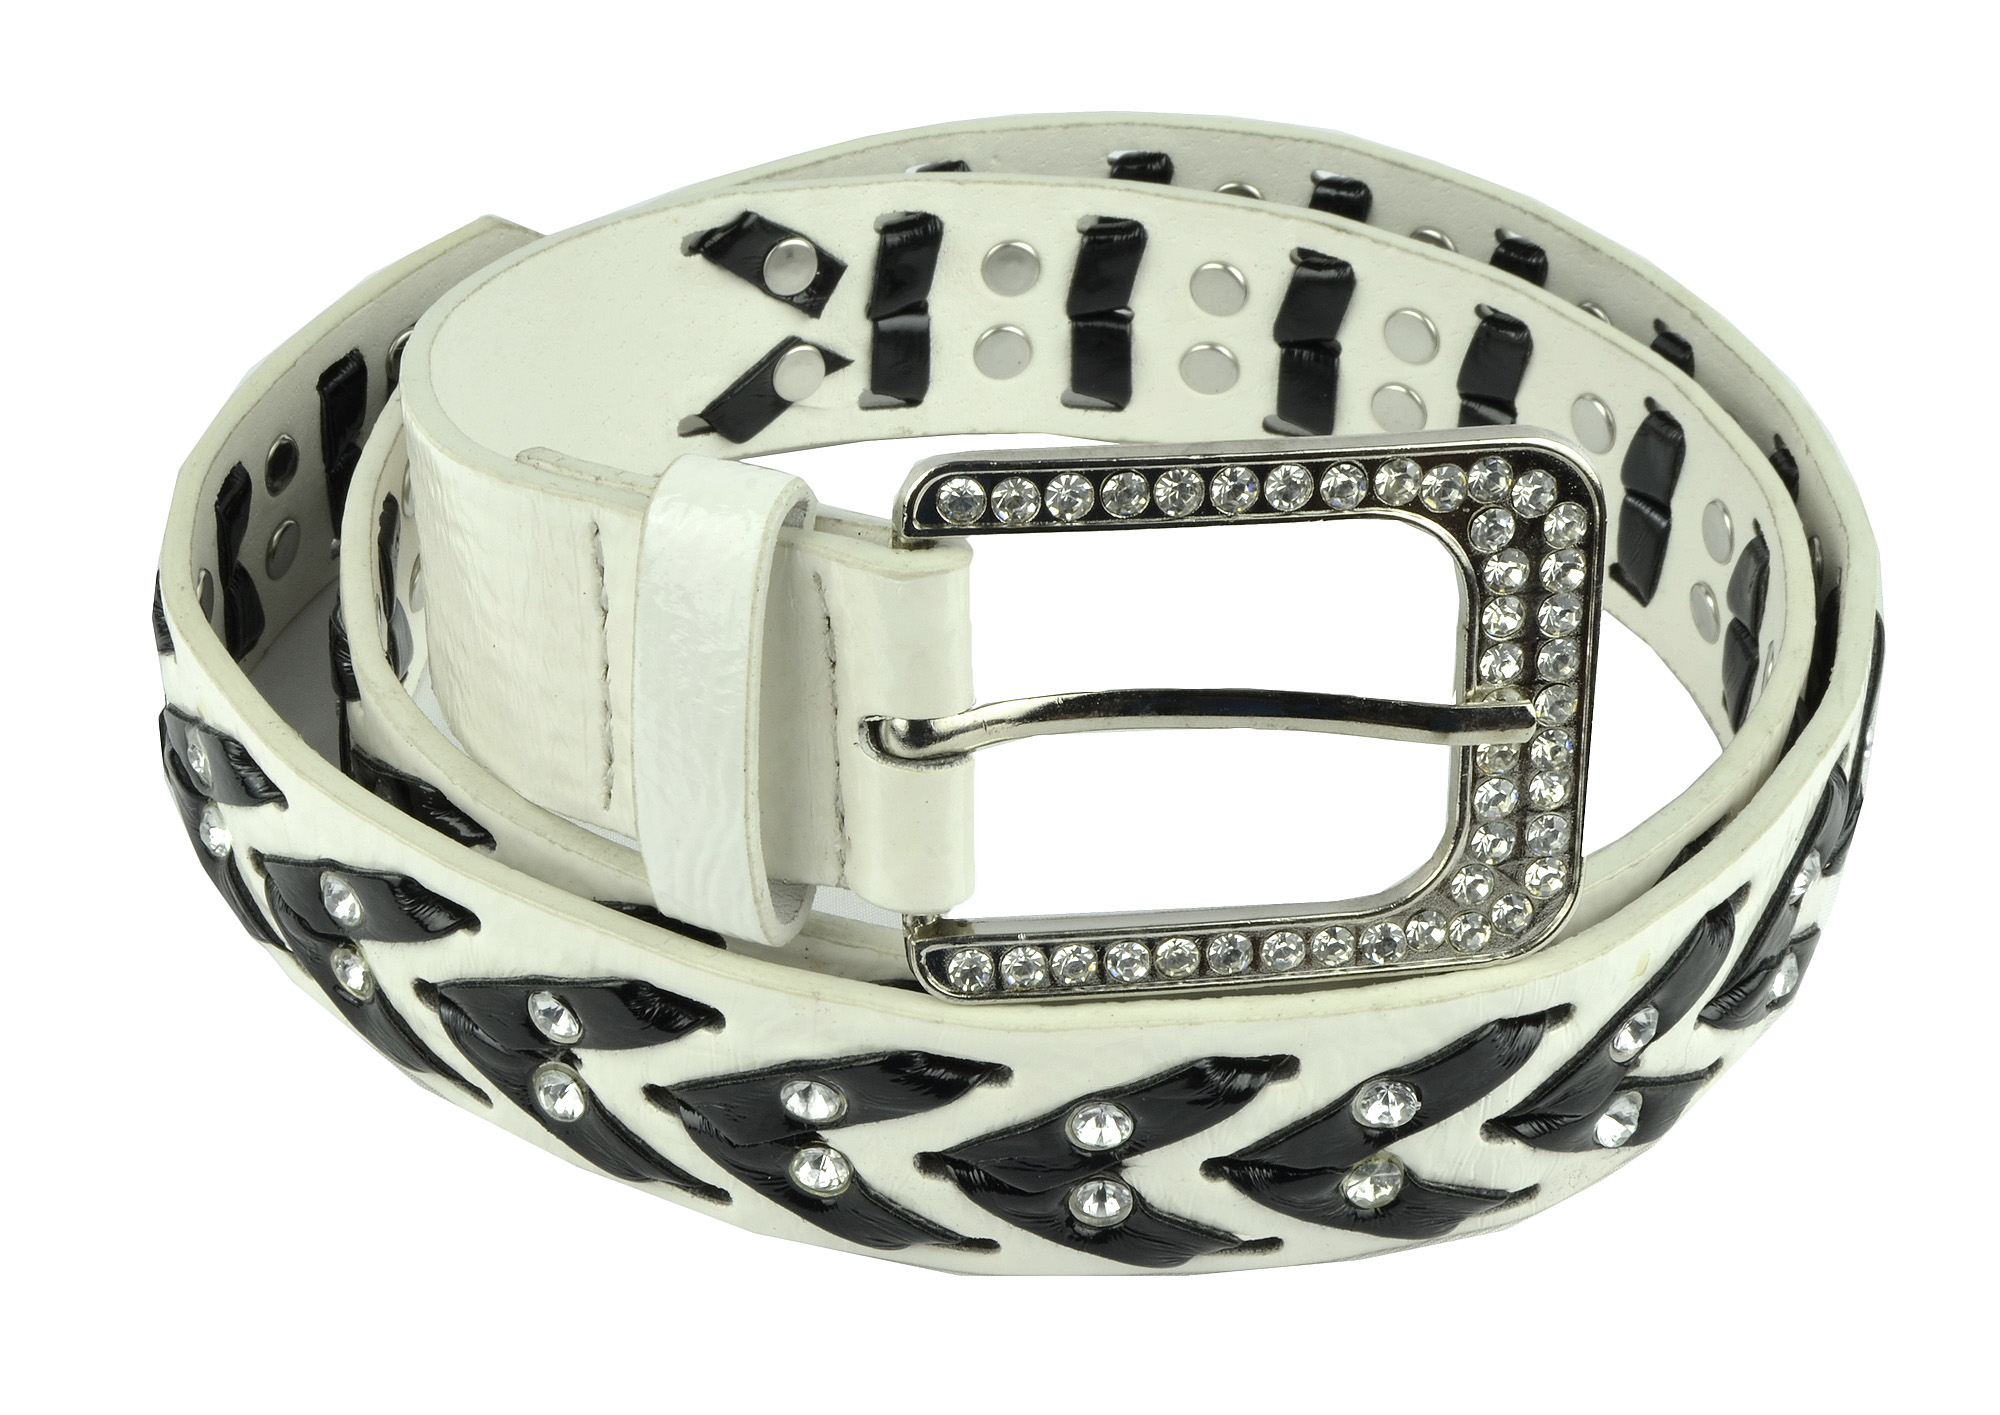 Womens Rhinestone Belts - Western Cowgirl Belt with Bling Buckles by Belle Donne - White